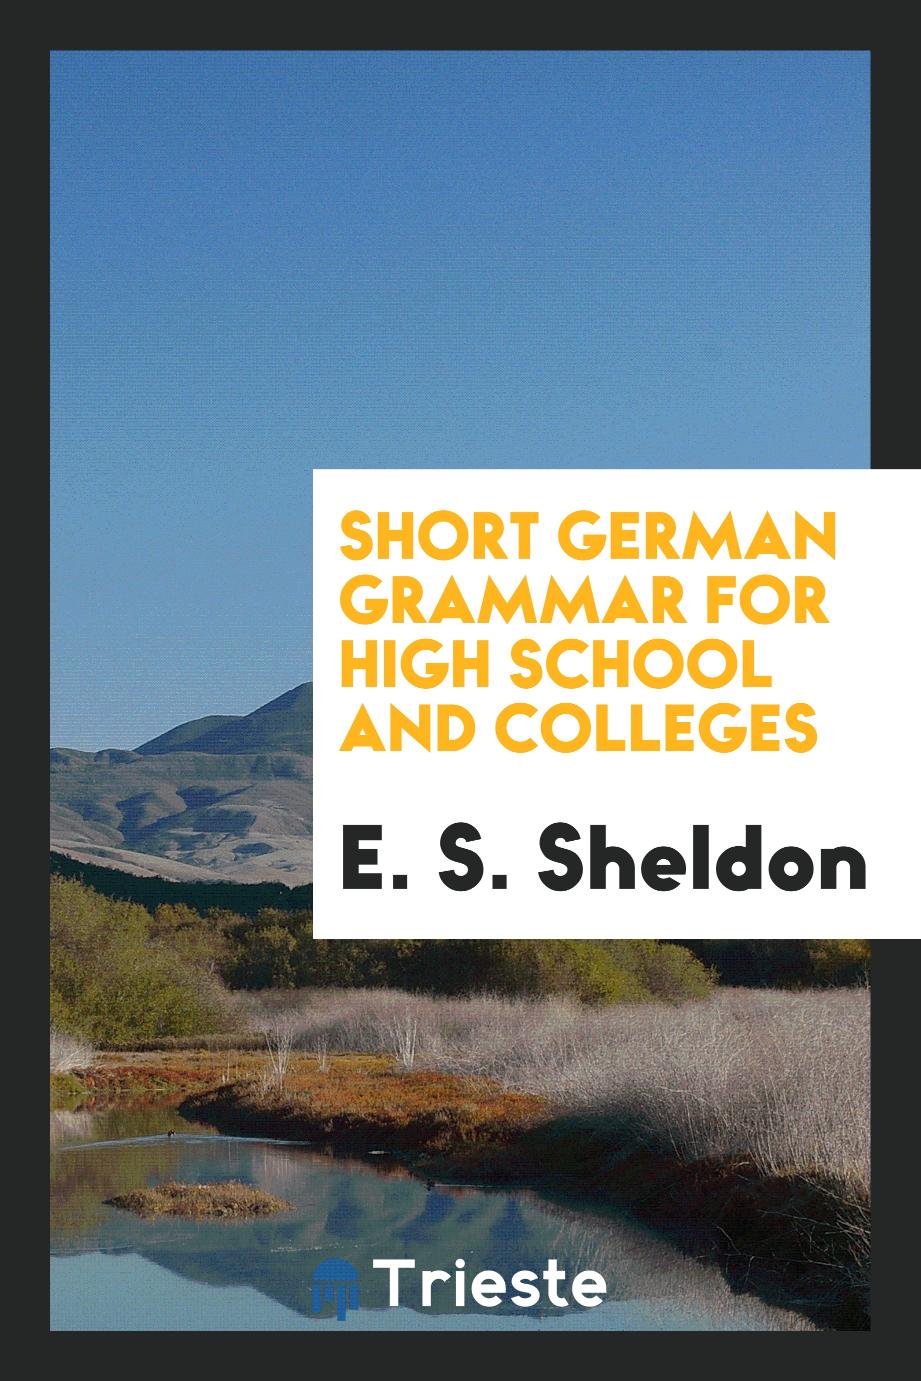 Short German Grammar for High School and Colleges